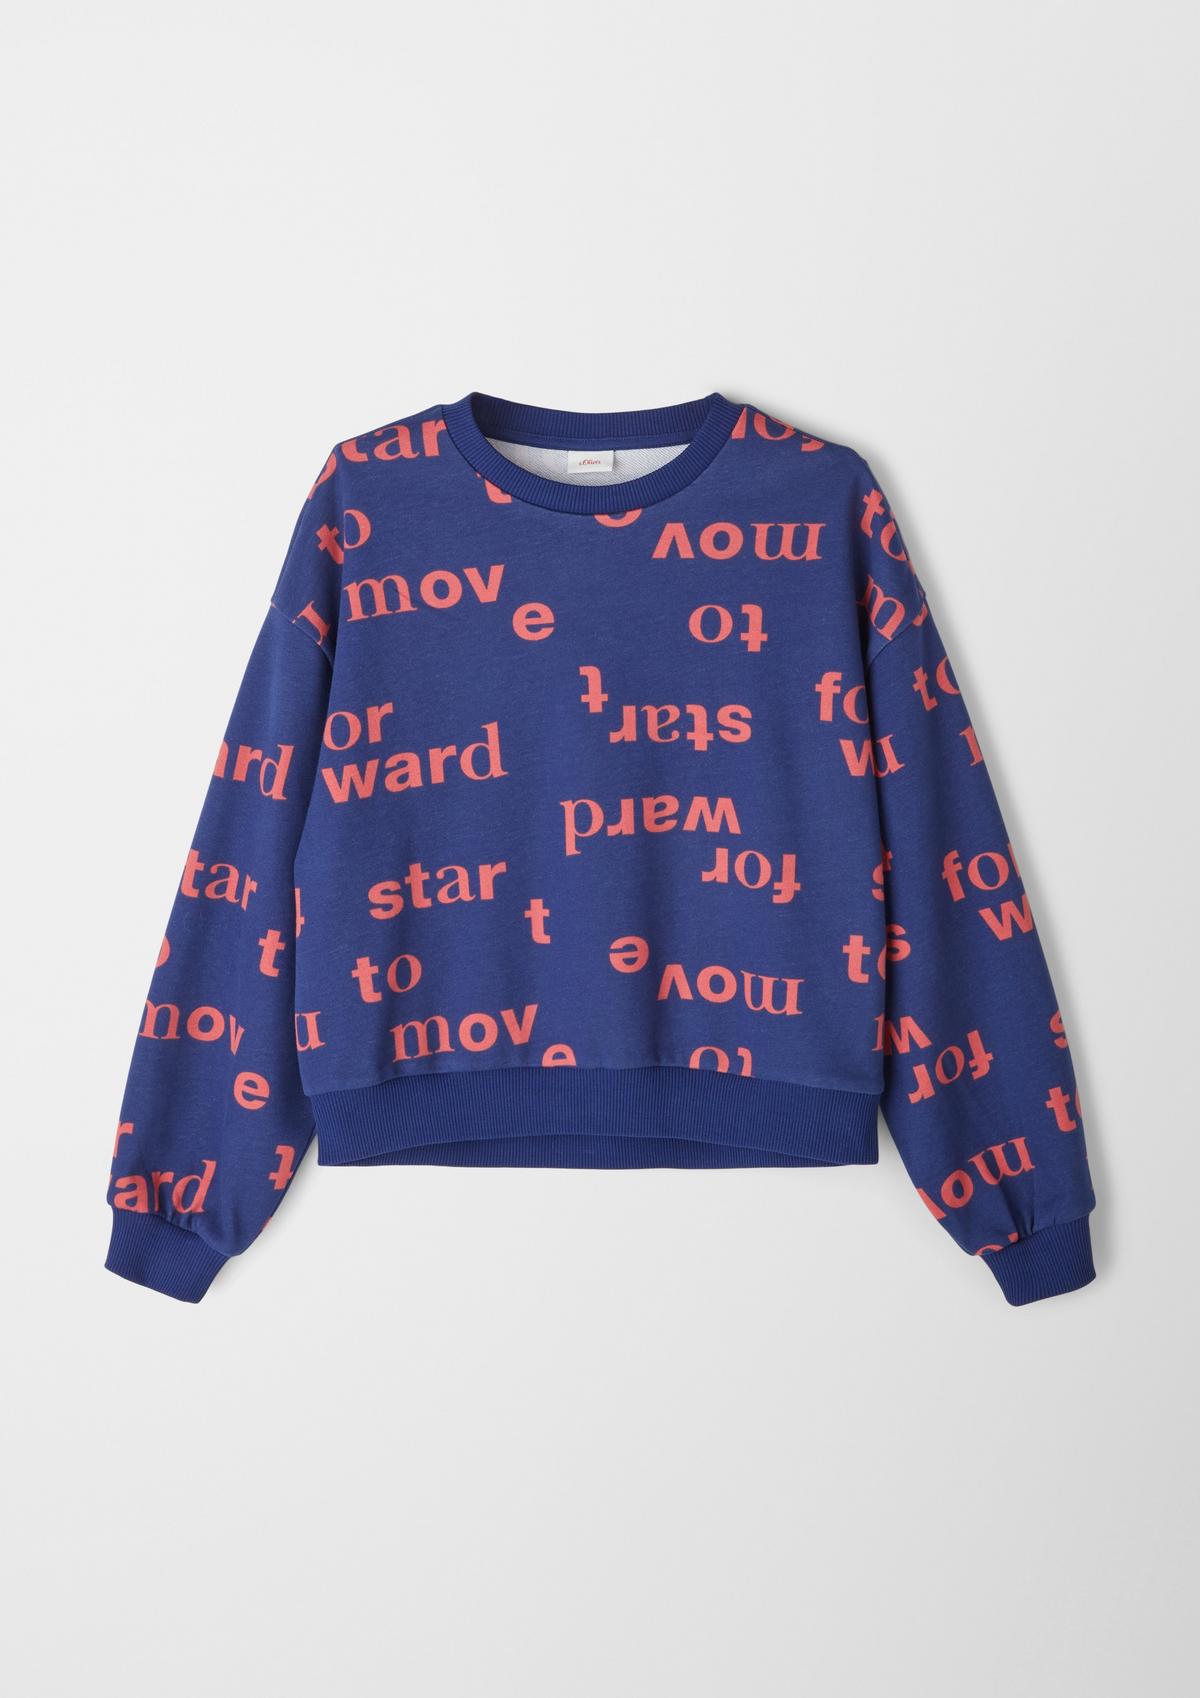 Sweatshirts and knitwear for girls teens and